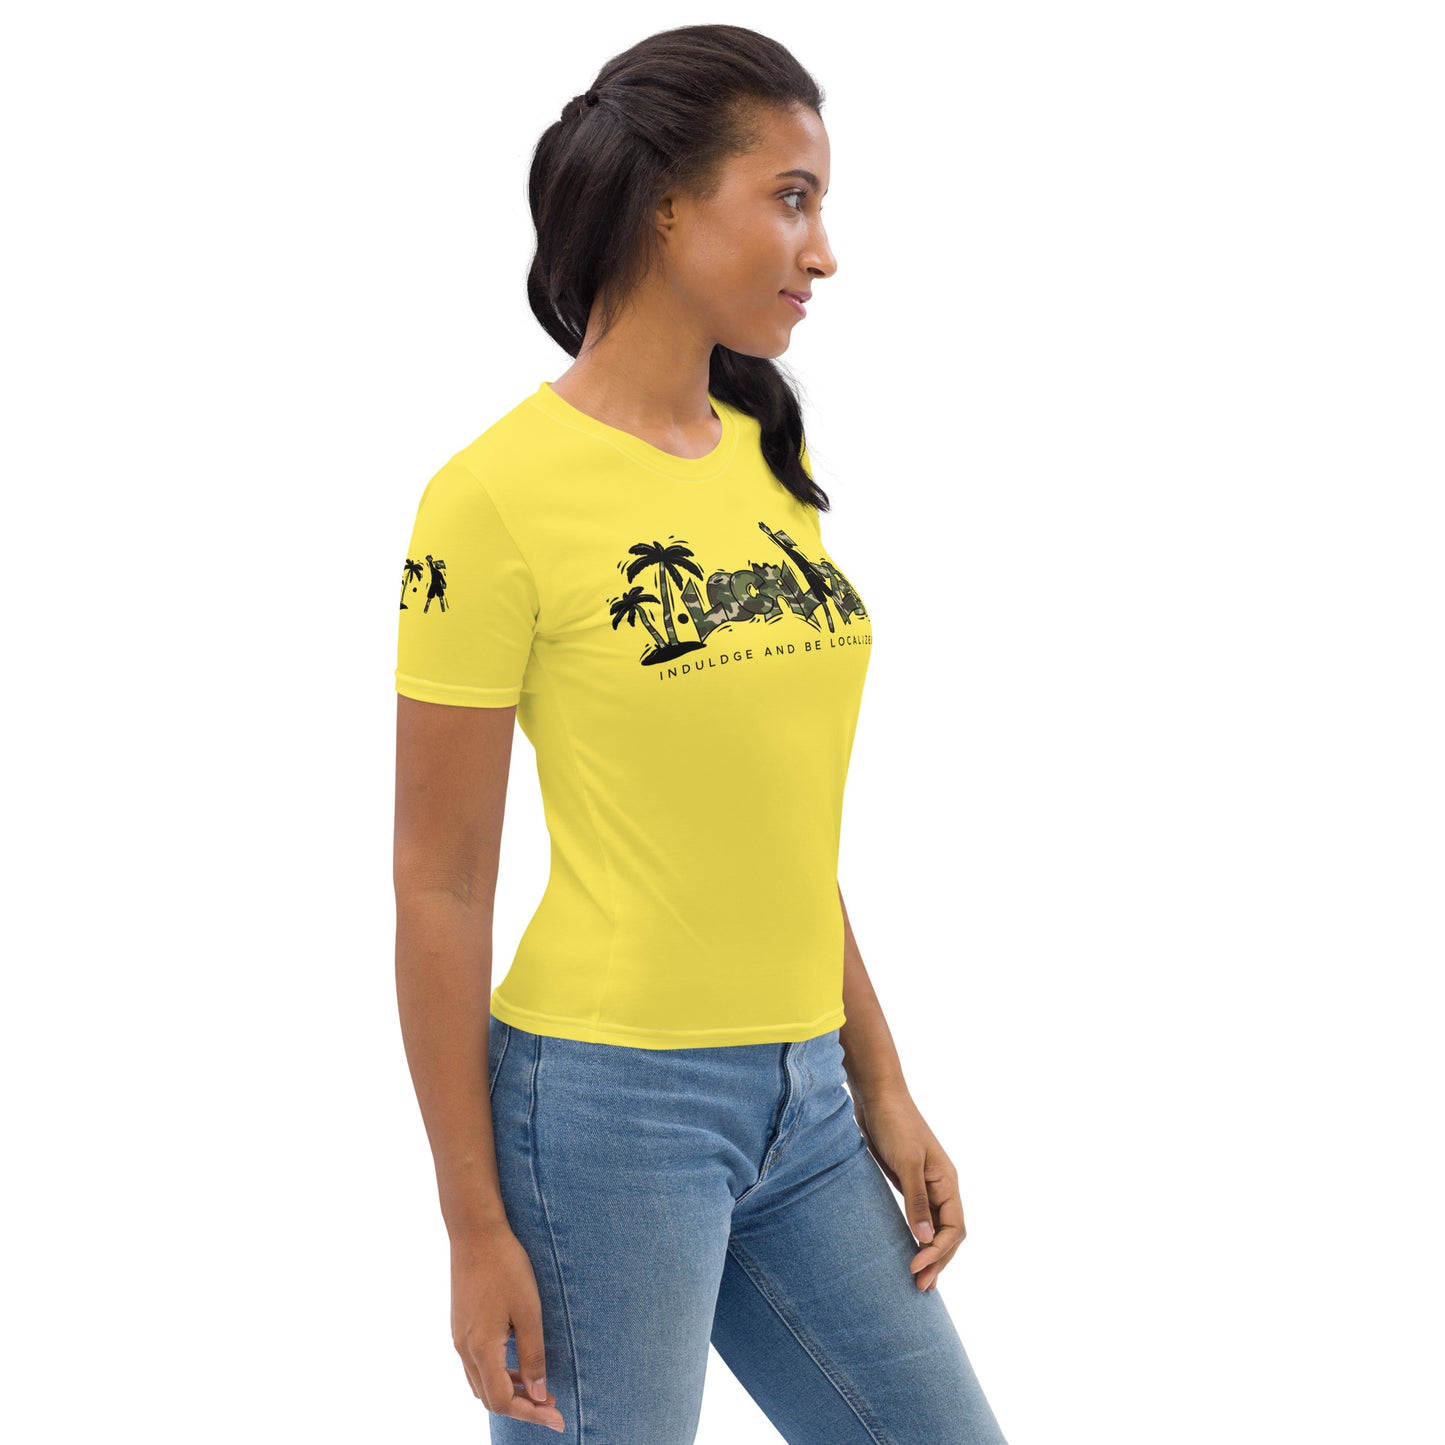 Yellow V.Localized (Camo) Women’s Dry-Fit T-Shirt